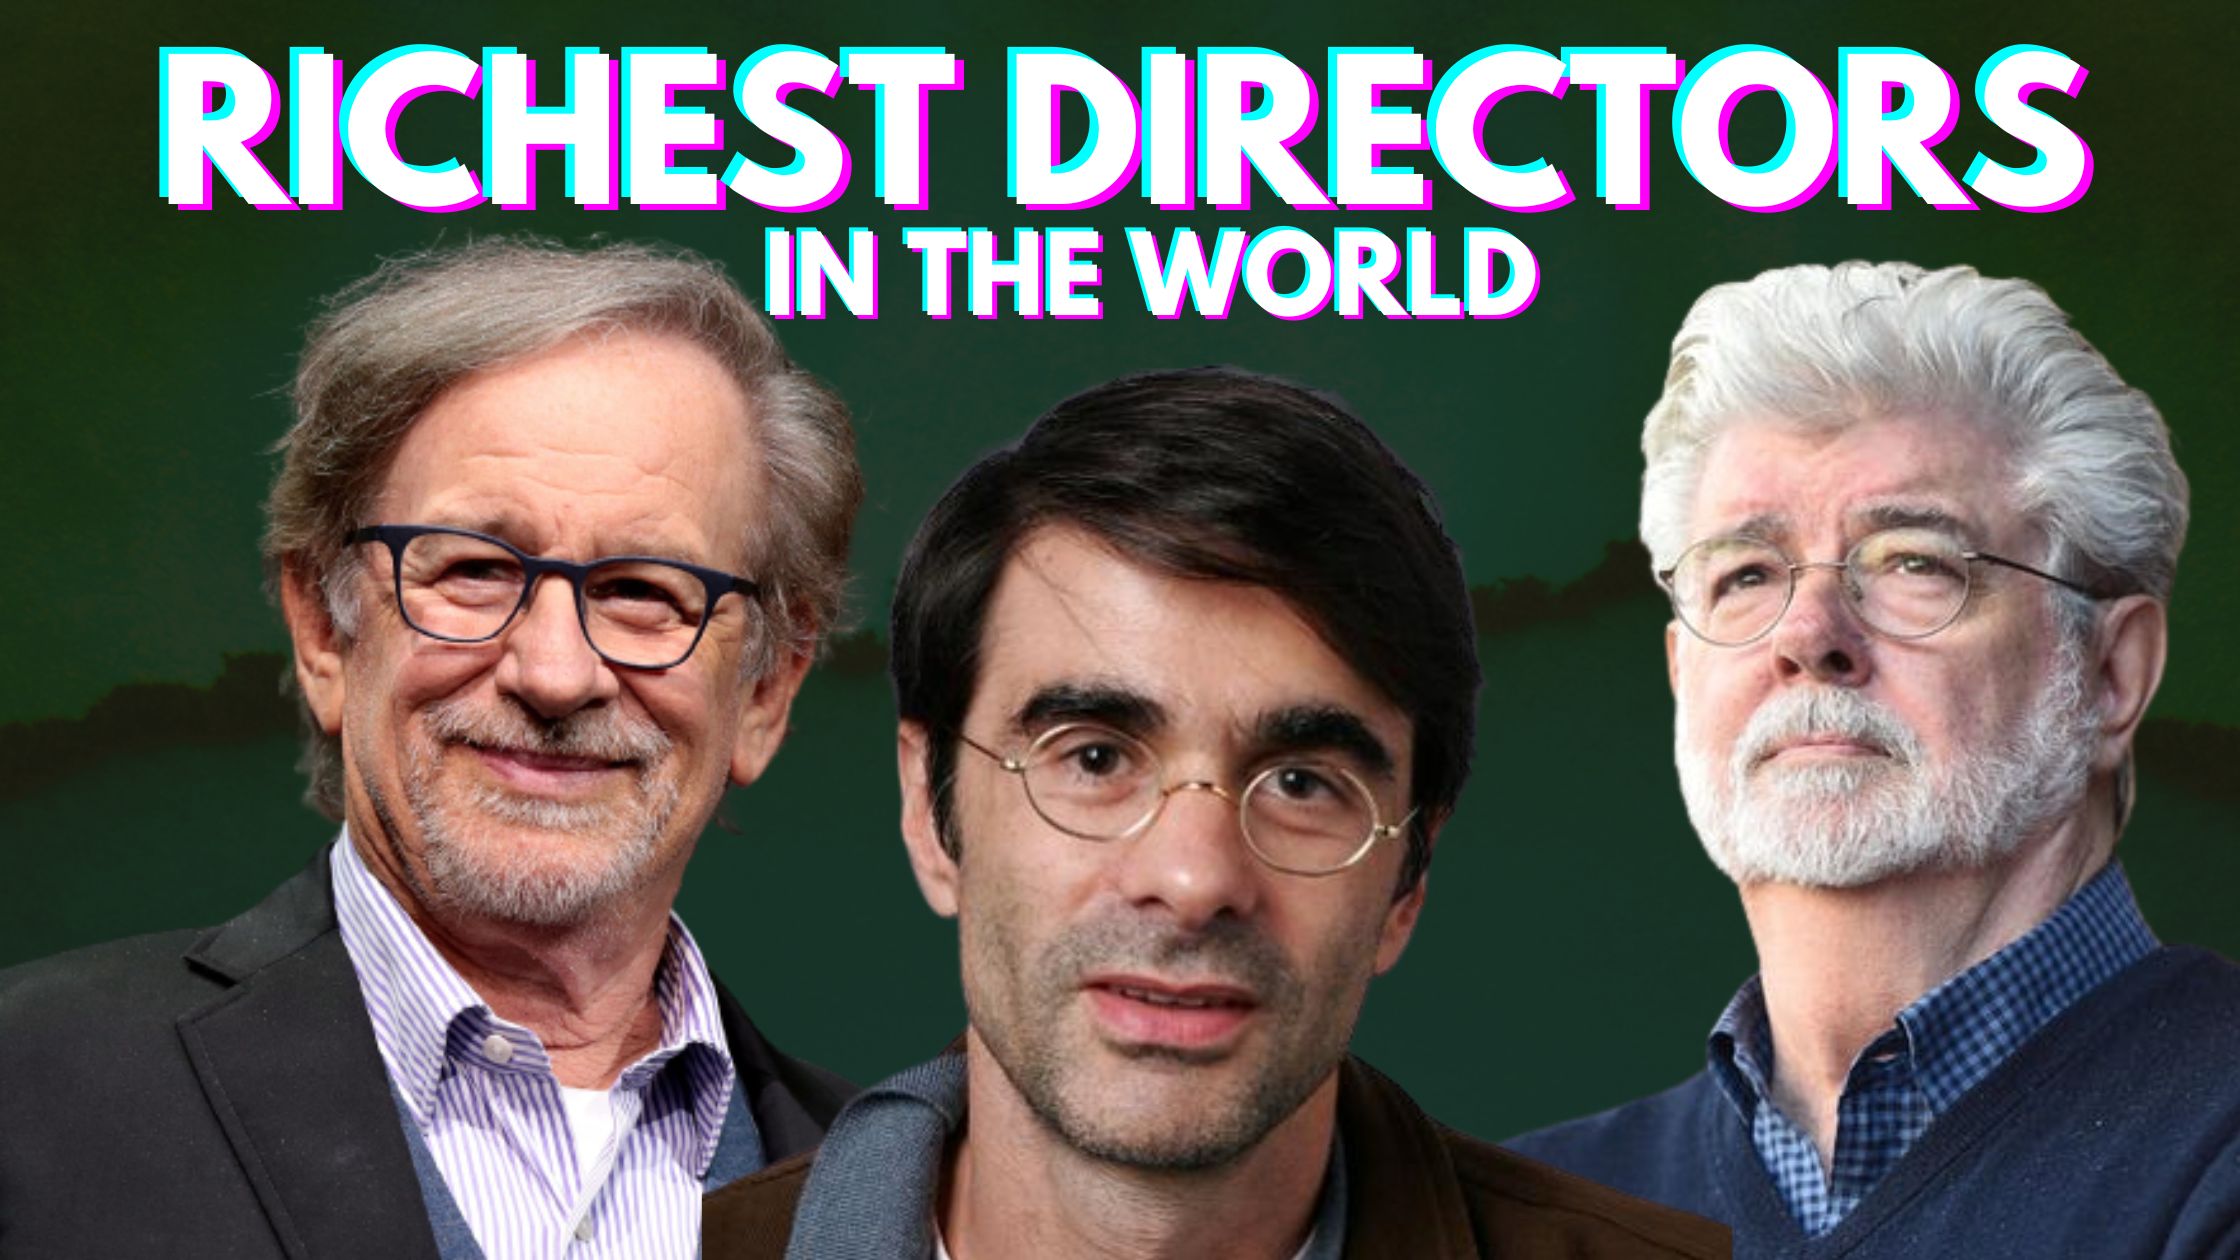 Richest Directors in the World